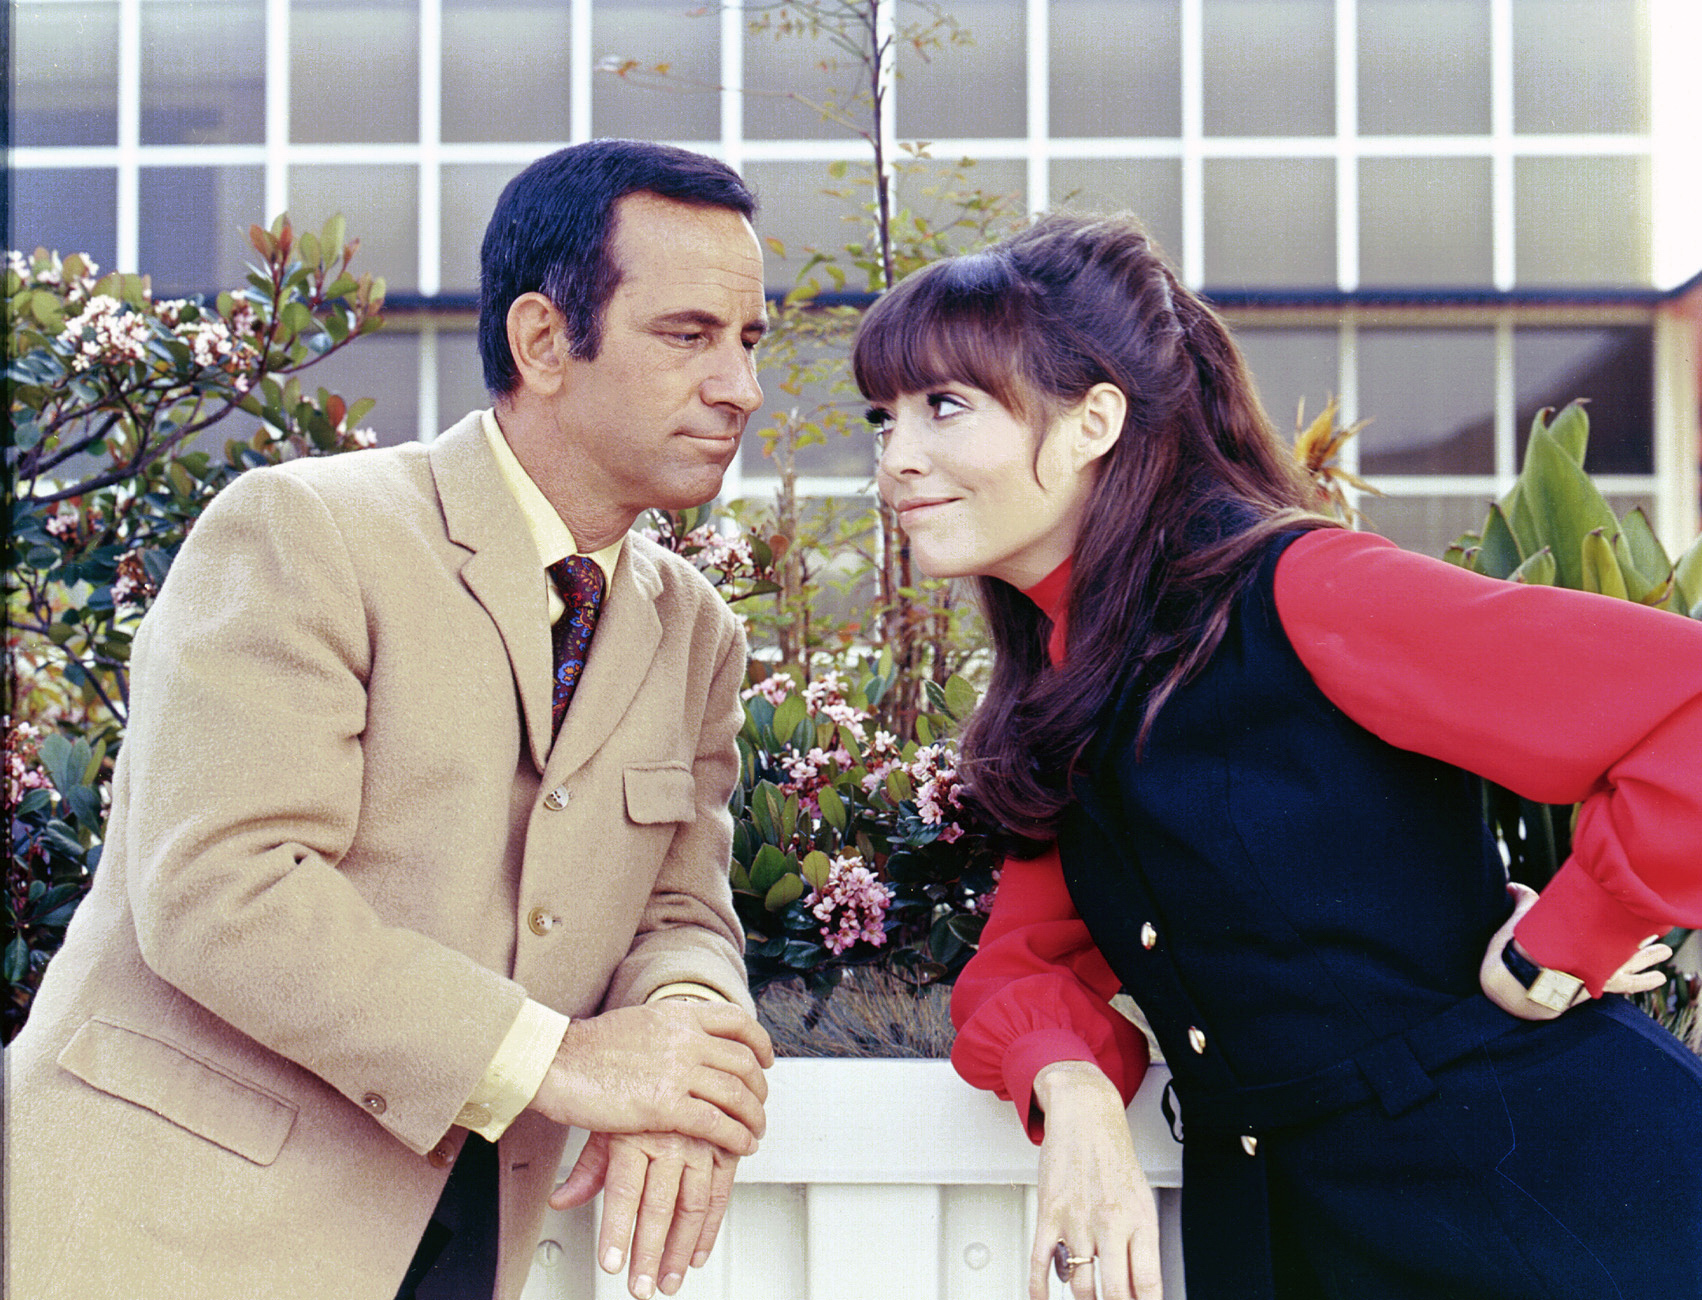 Don Adams as Maxwell Smart and Barbara Feldon as Agent 99 in "Get Smart," on January 30, 1969, in Los Angeles | Source: Getty Images